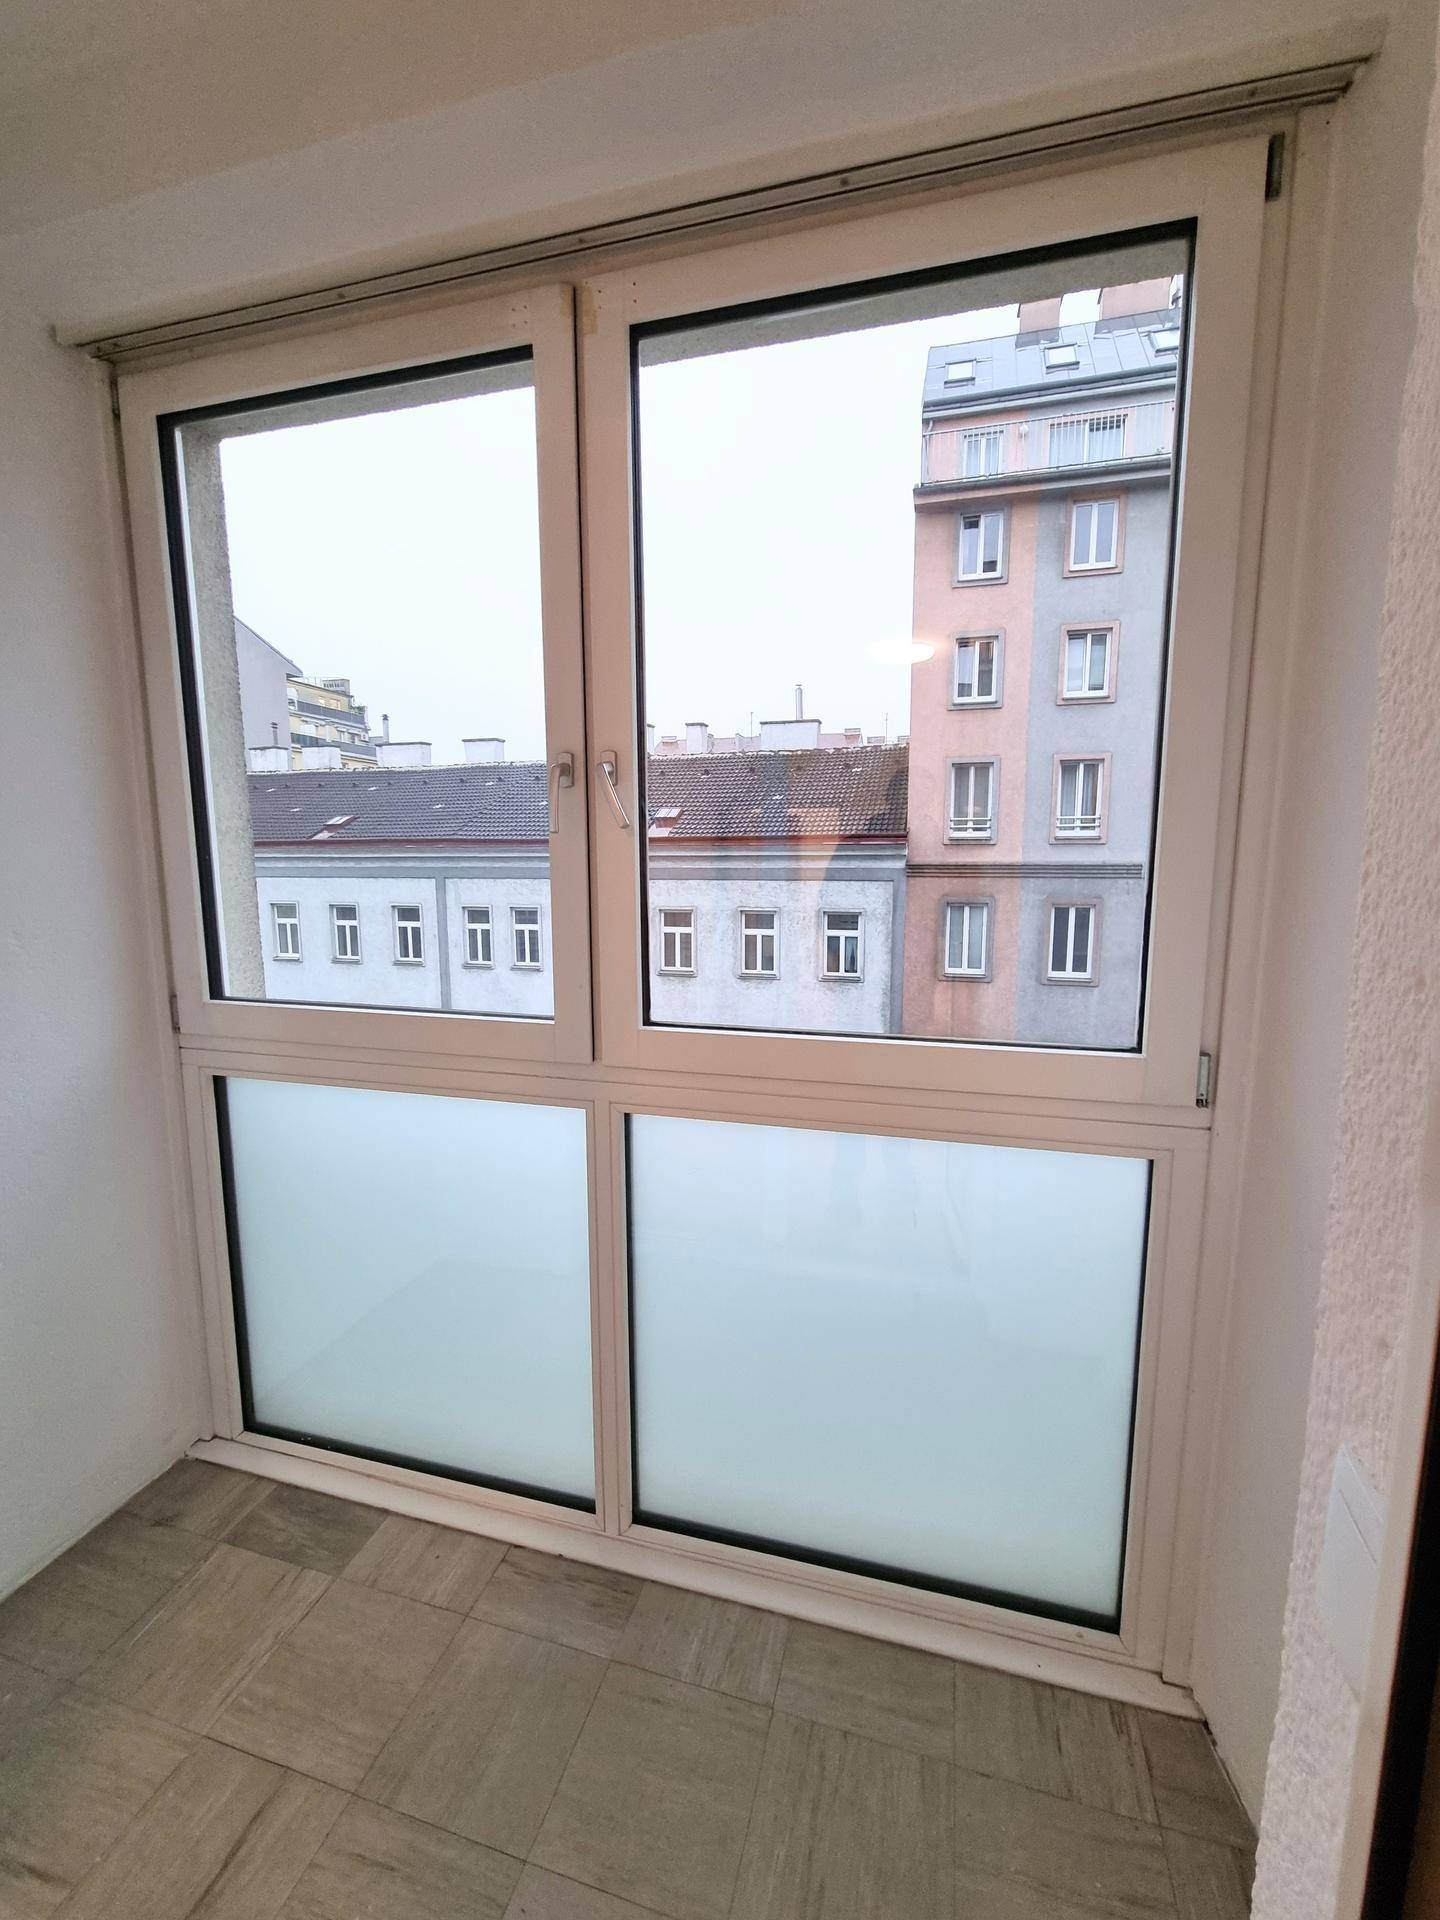 https://pictures.immobilienscout24.de/prod.www.immobilienscout24.at/pictureserver/loadPicture?q=70&id=012.001P900000C3Aad-81a6b4839f35445b9f69115a1579f0fa